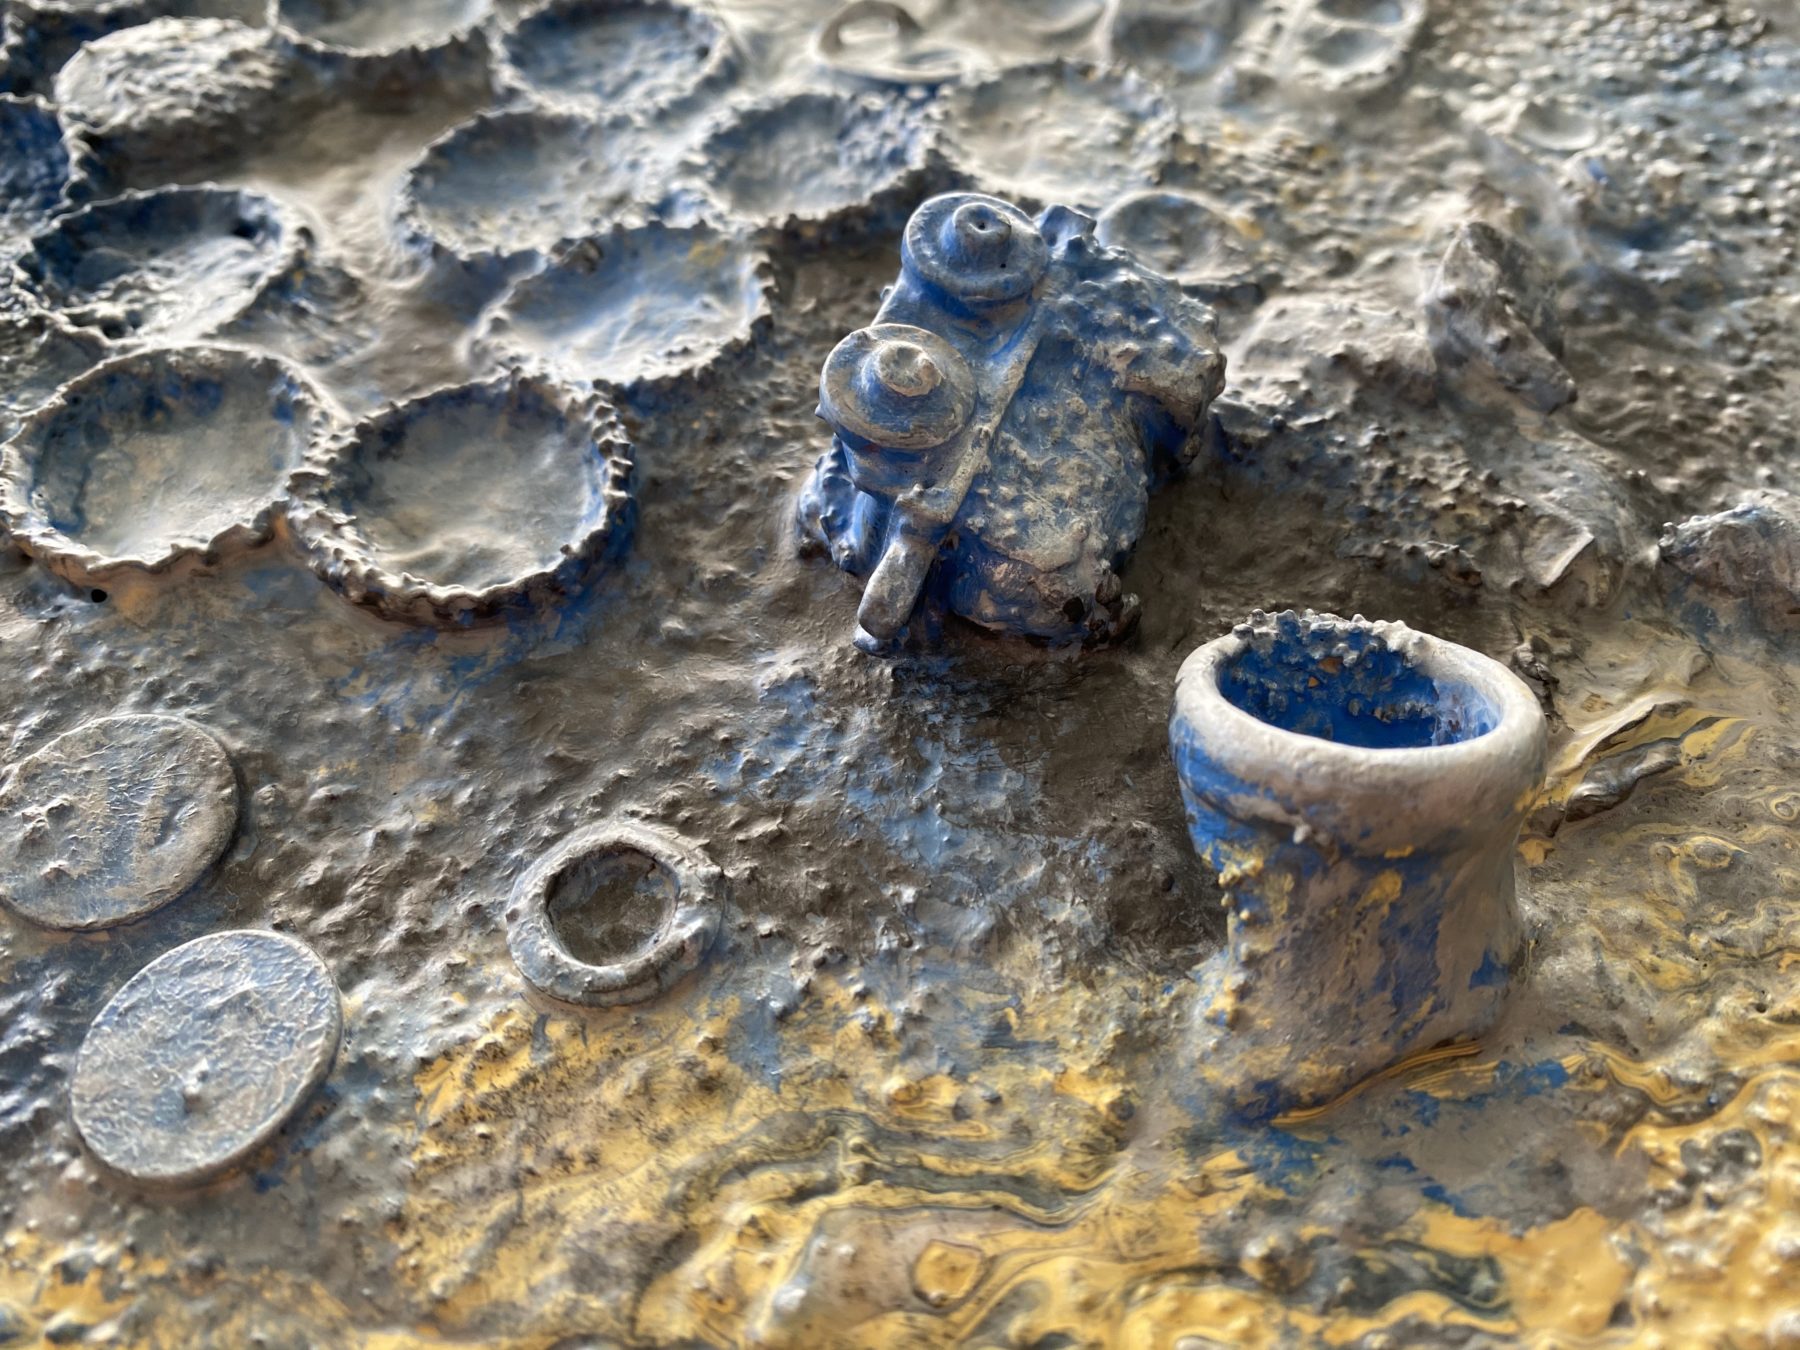 Detail of a toy train car and bottle caps from metal detecting artwork